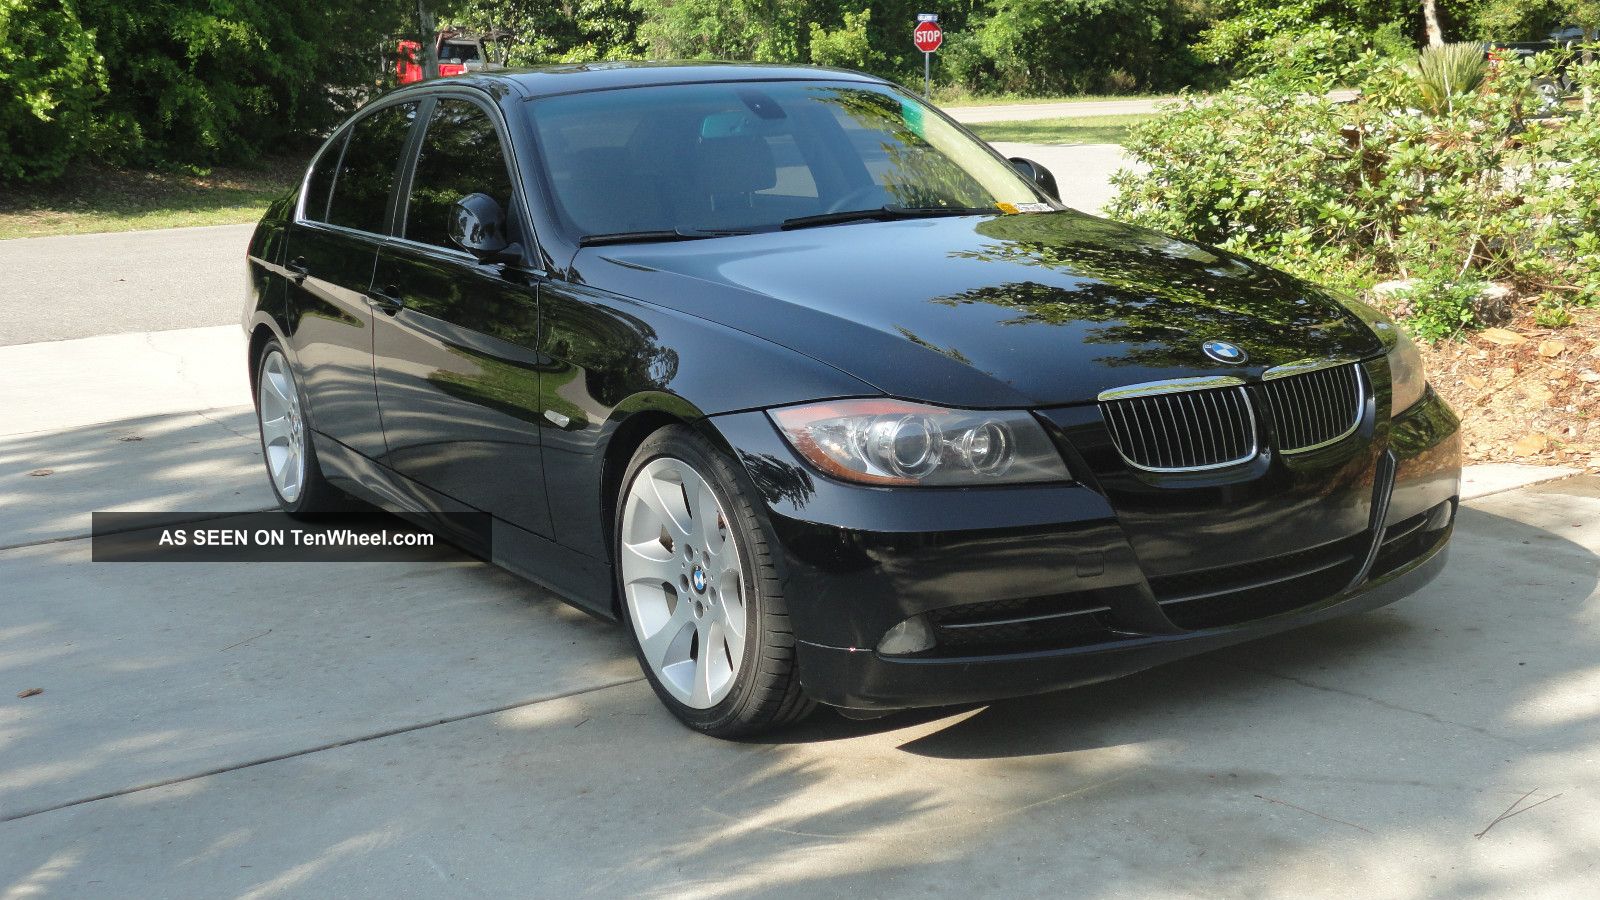 2006 Bmw 330i With Sport And Premium Package, Black